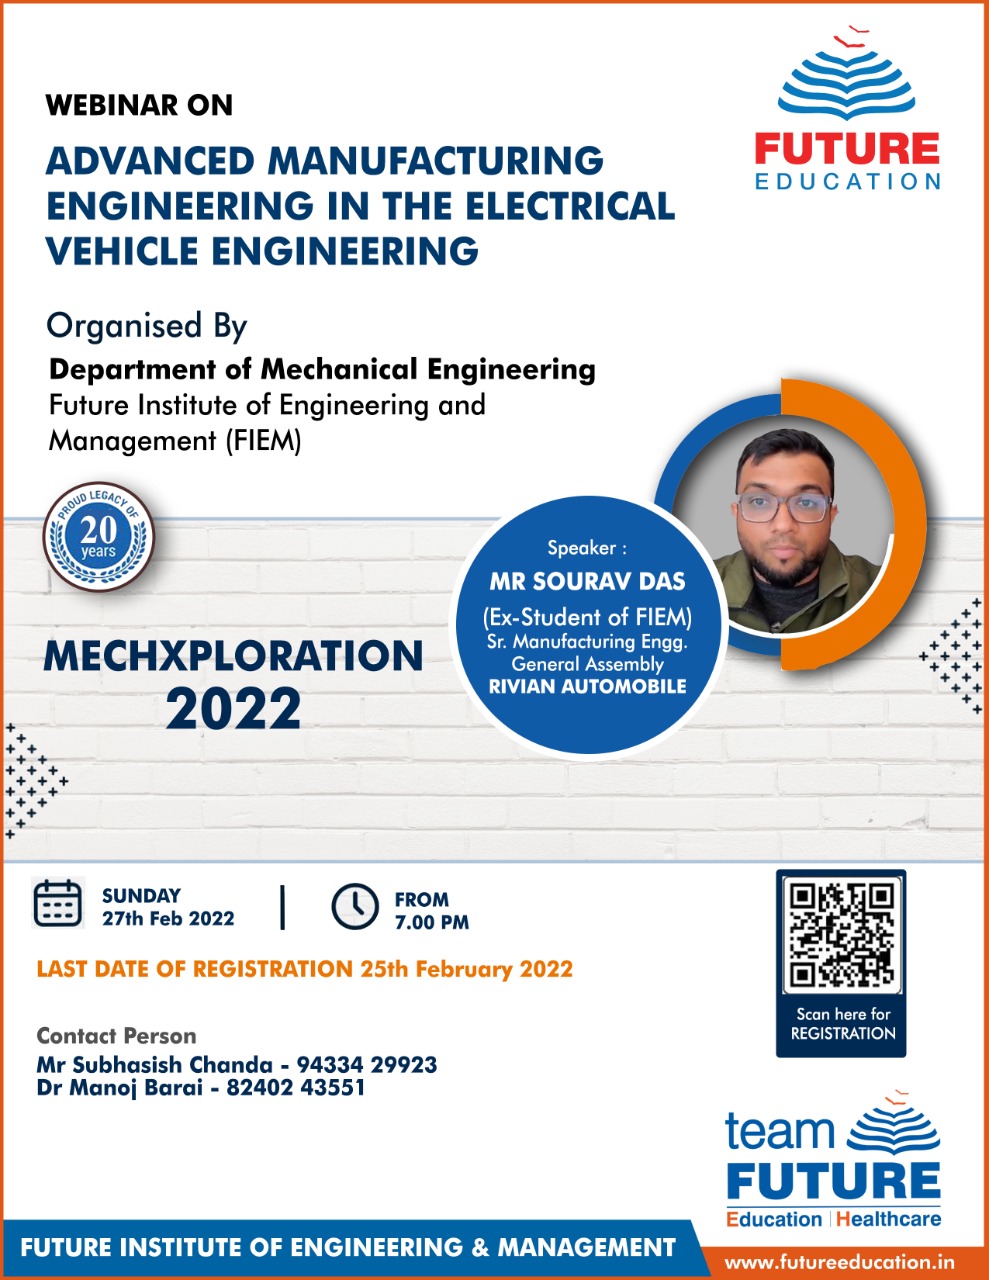 Webinar on Advanced Manufacturing Engineering in the Electrical Vehical Engineering